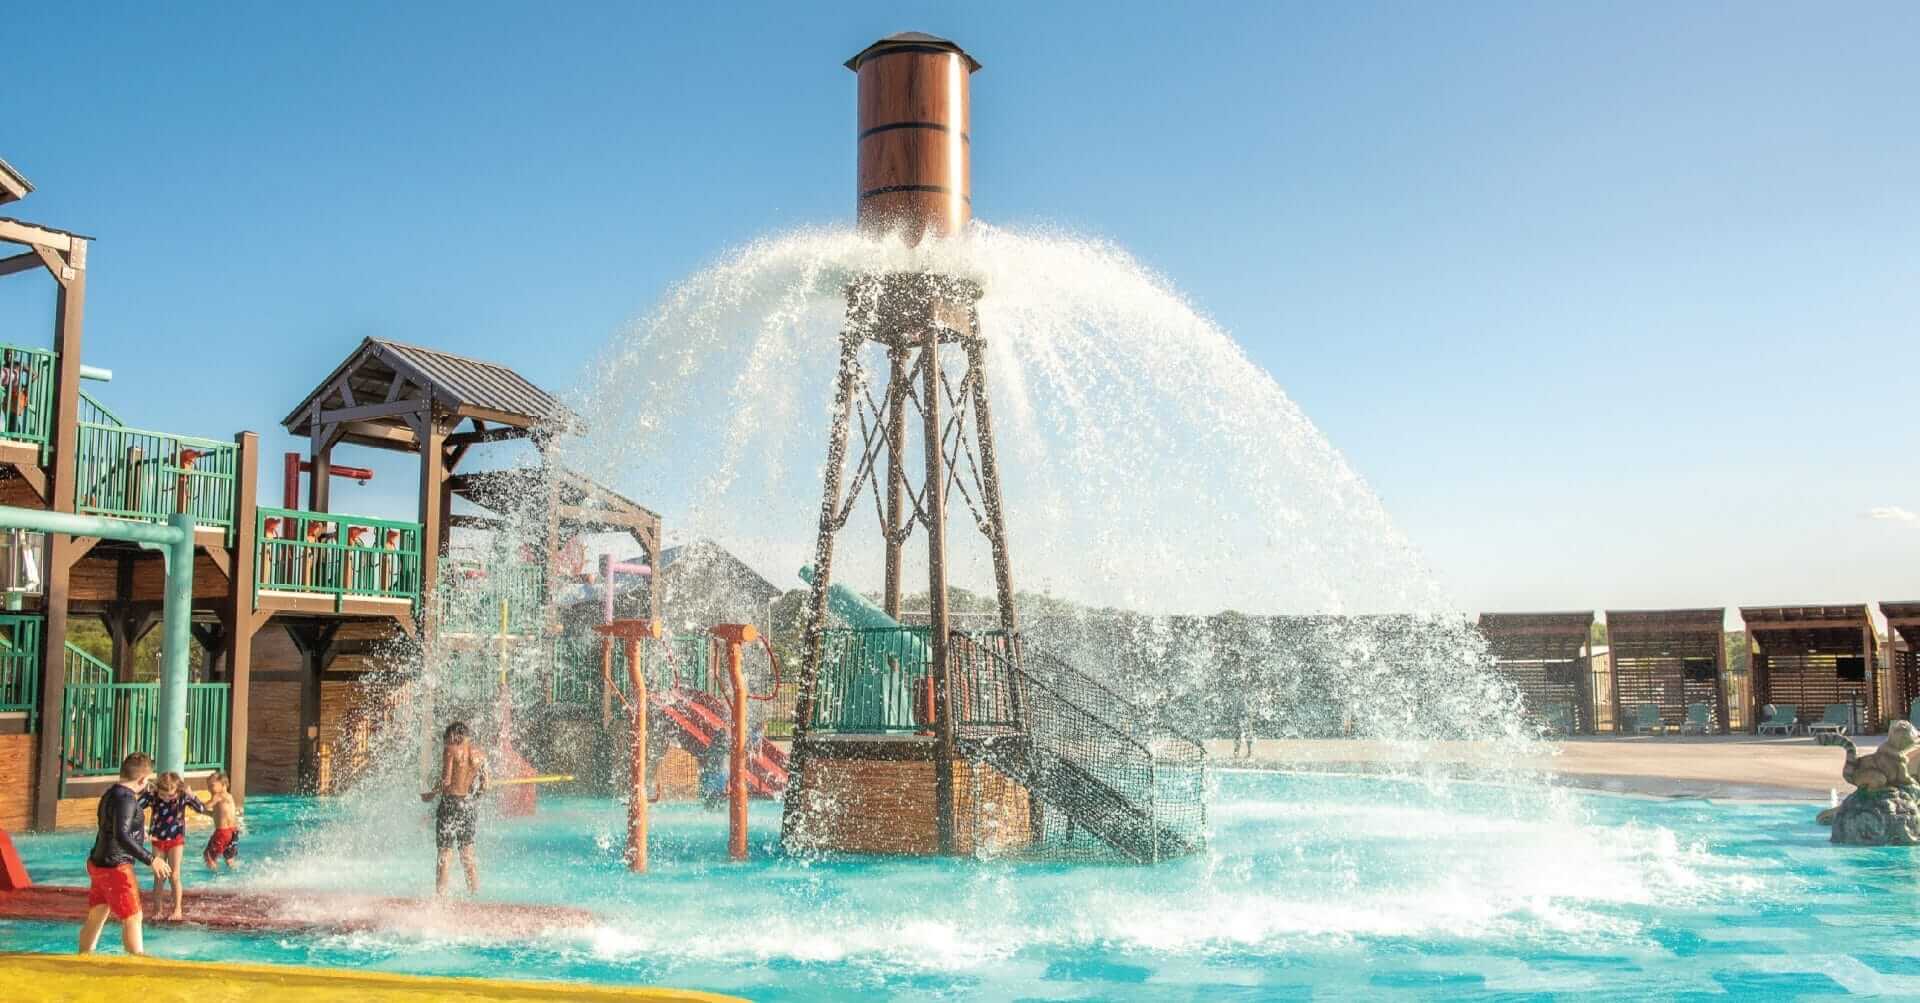 The Power Plunge water feature by Interactive Play releases up to 750 gallons of water in a beautiful 360-degree spray pattern over the pool deck floor at the Camp Fimfo RV Resort in Waco Texas.